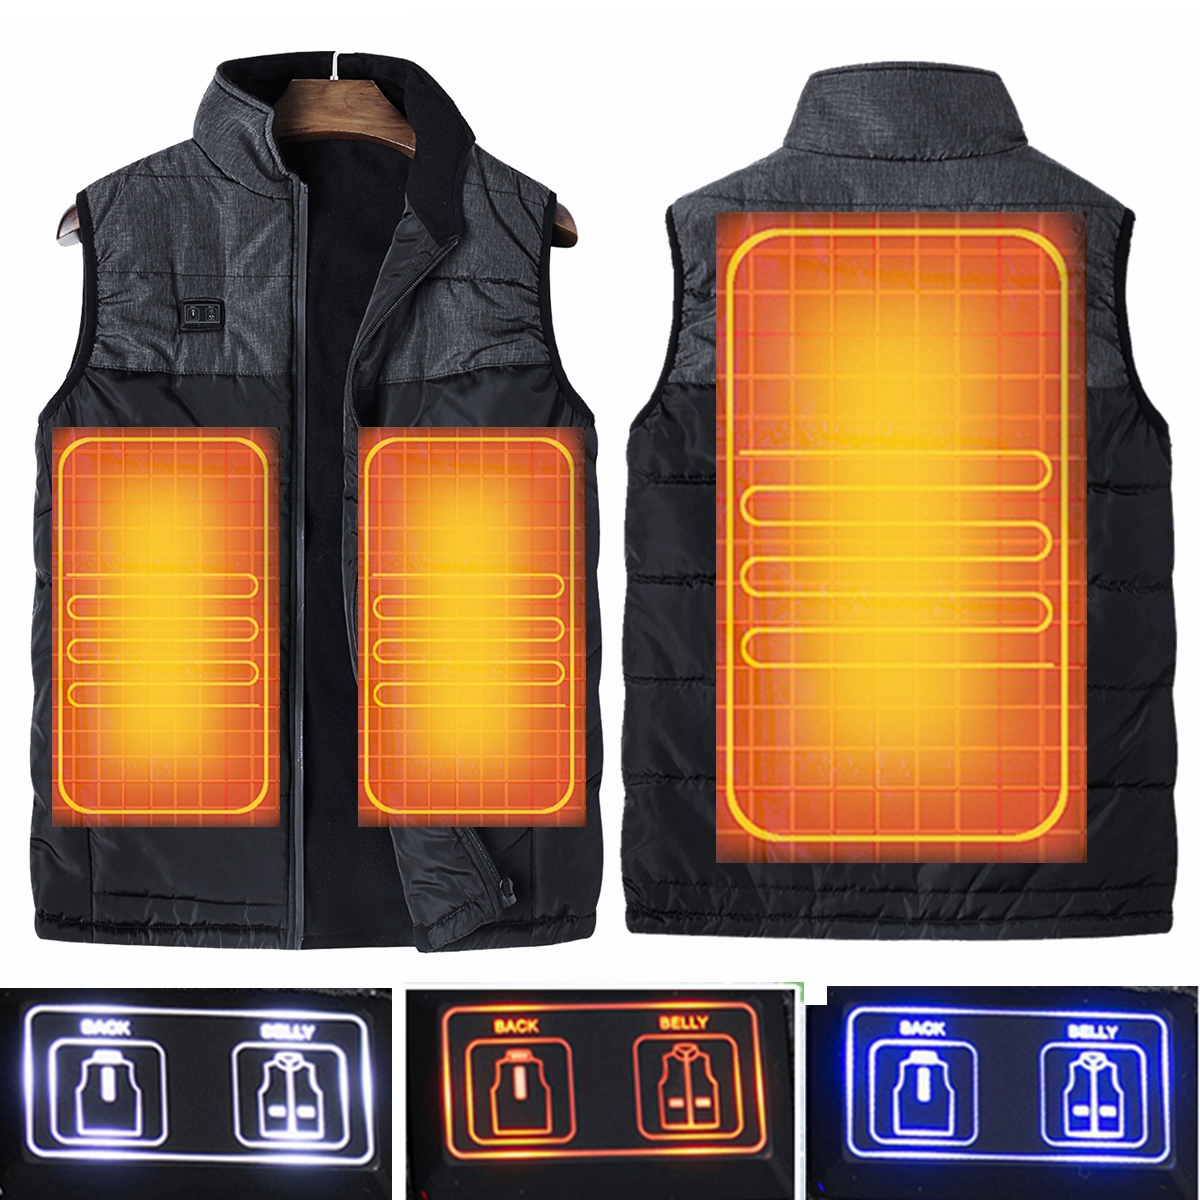 

Dual Control Electric Vest Heated Outdoor Jacket USB Warm Up Heating Pad Winter Body Warmer